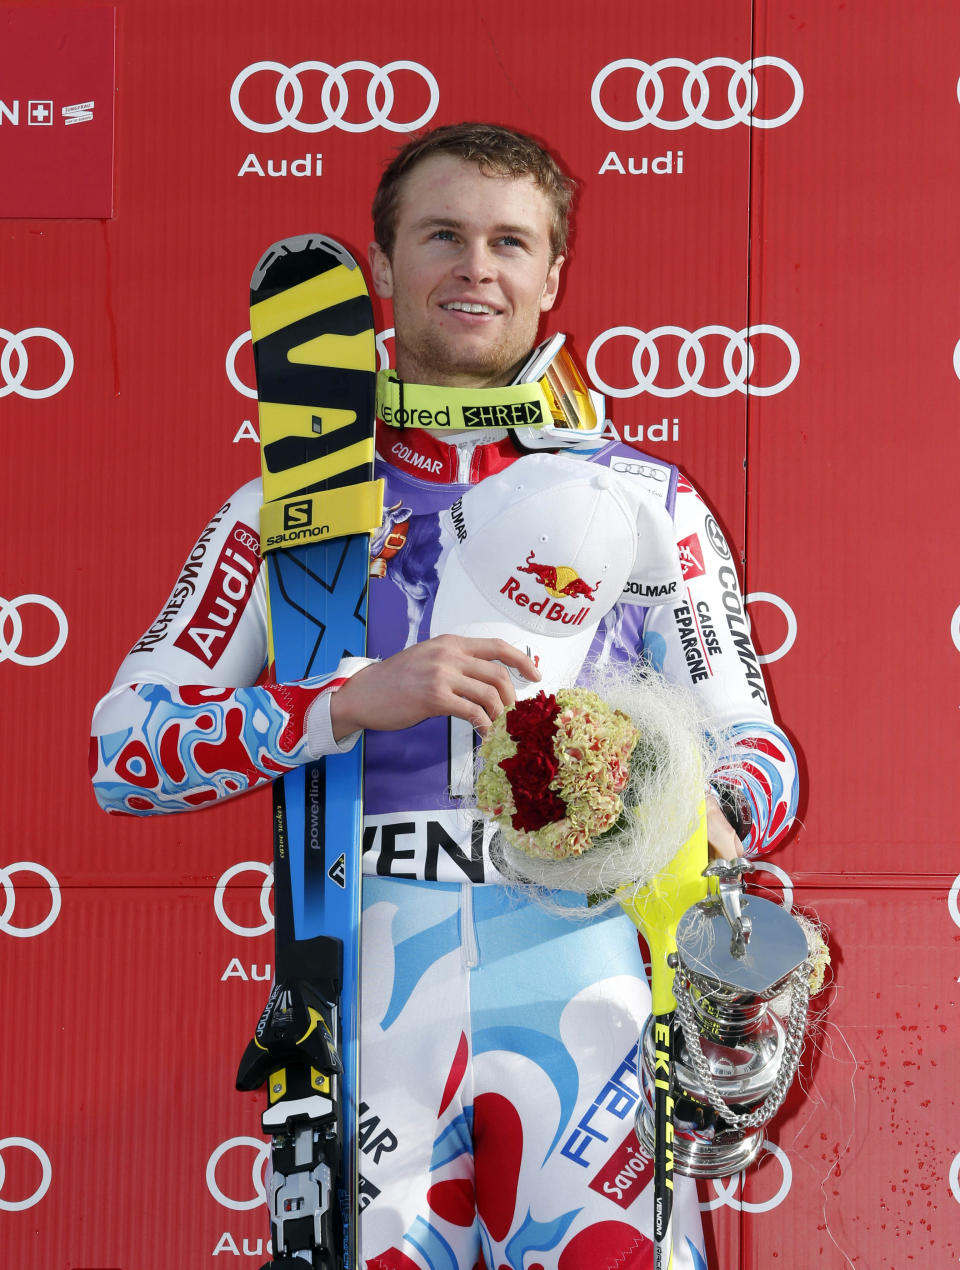 France's Alexis Pinturault poses on the podium after winning an alpine ski, men's World Cup slalom, in Wengen, Switzerland, Sunday, Jan. 19, 2014. Alexis Pinturault of France soared from seventh place after the first run to win a World Cup slalom on Sunday. Pinturault was almost a half-second faster than everyone else in the afternoon to finish 0.34 ahead of Felix Neureuther of Germany. (AP Photo/Shinichiro Tanaka)